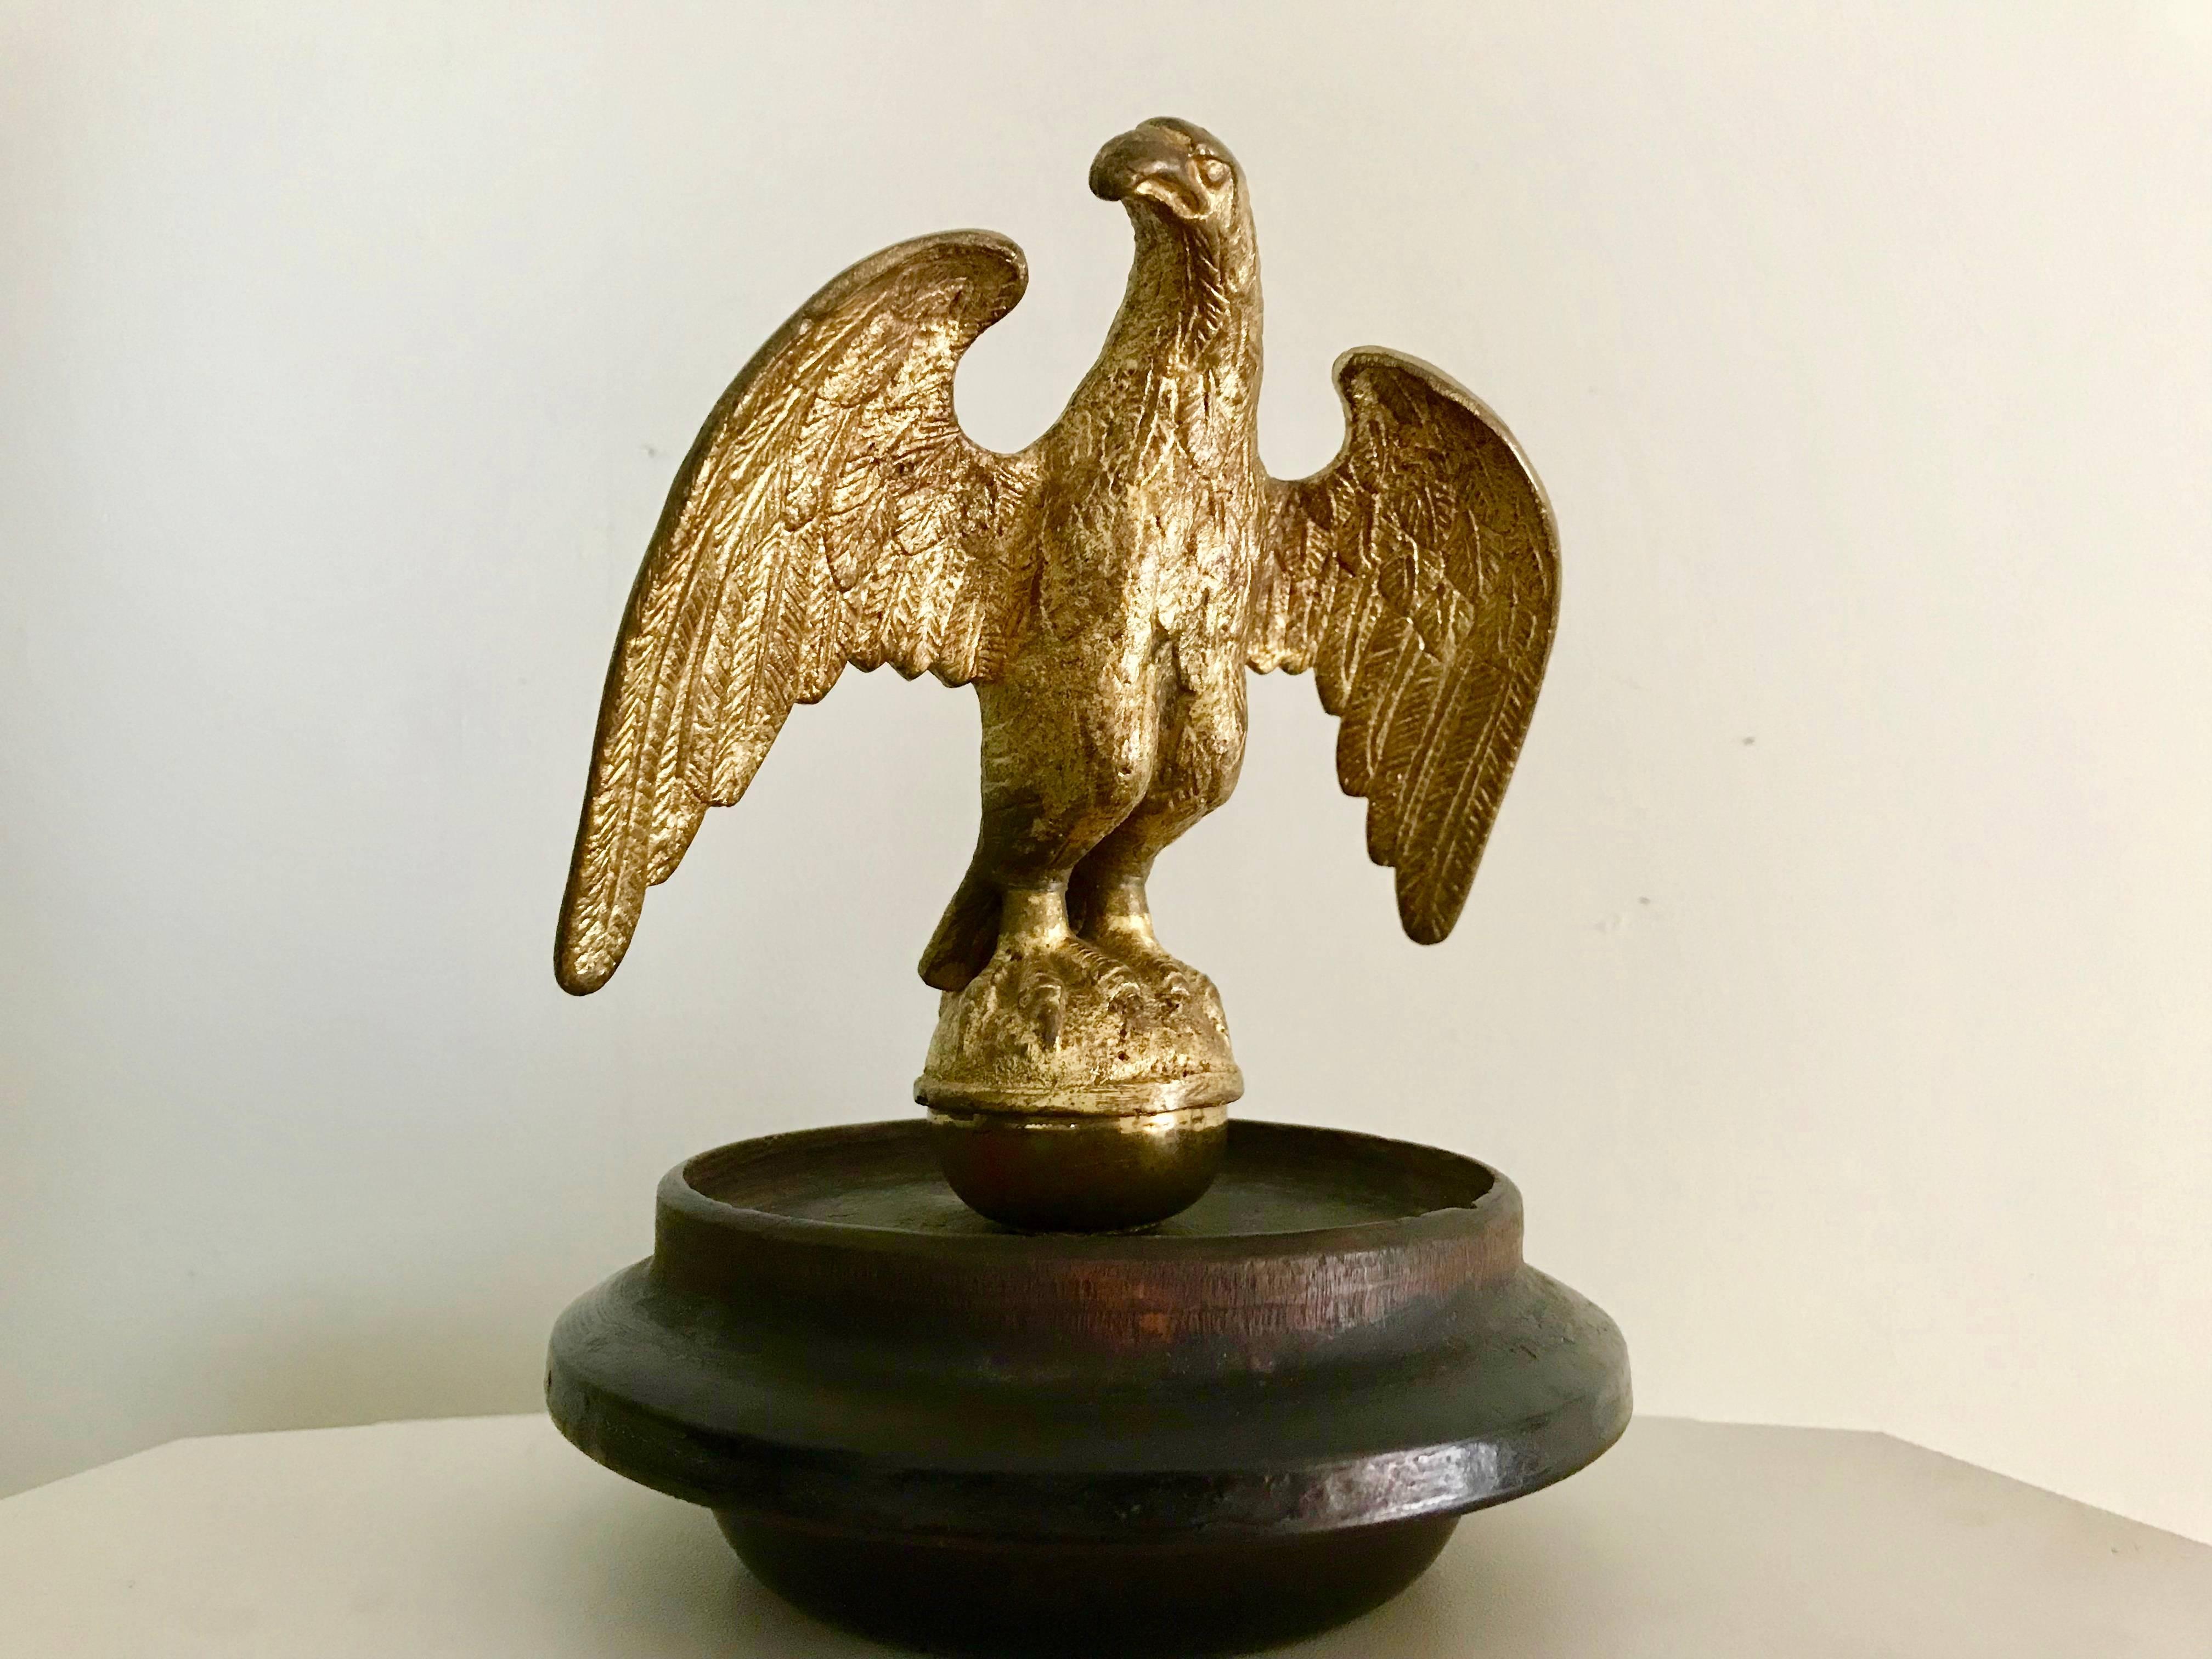 A late 19th century American gilt bronze figure of an eagle with wings unfurled shown standing on a globe or orb as if ready to take flight. Most likely this was a finial for a flag pole, the bottom of the orb is threaded for attachment. Now mounted